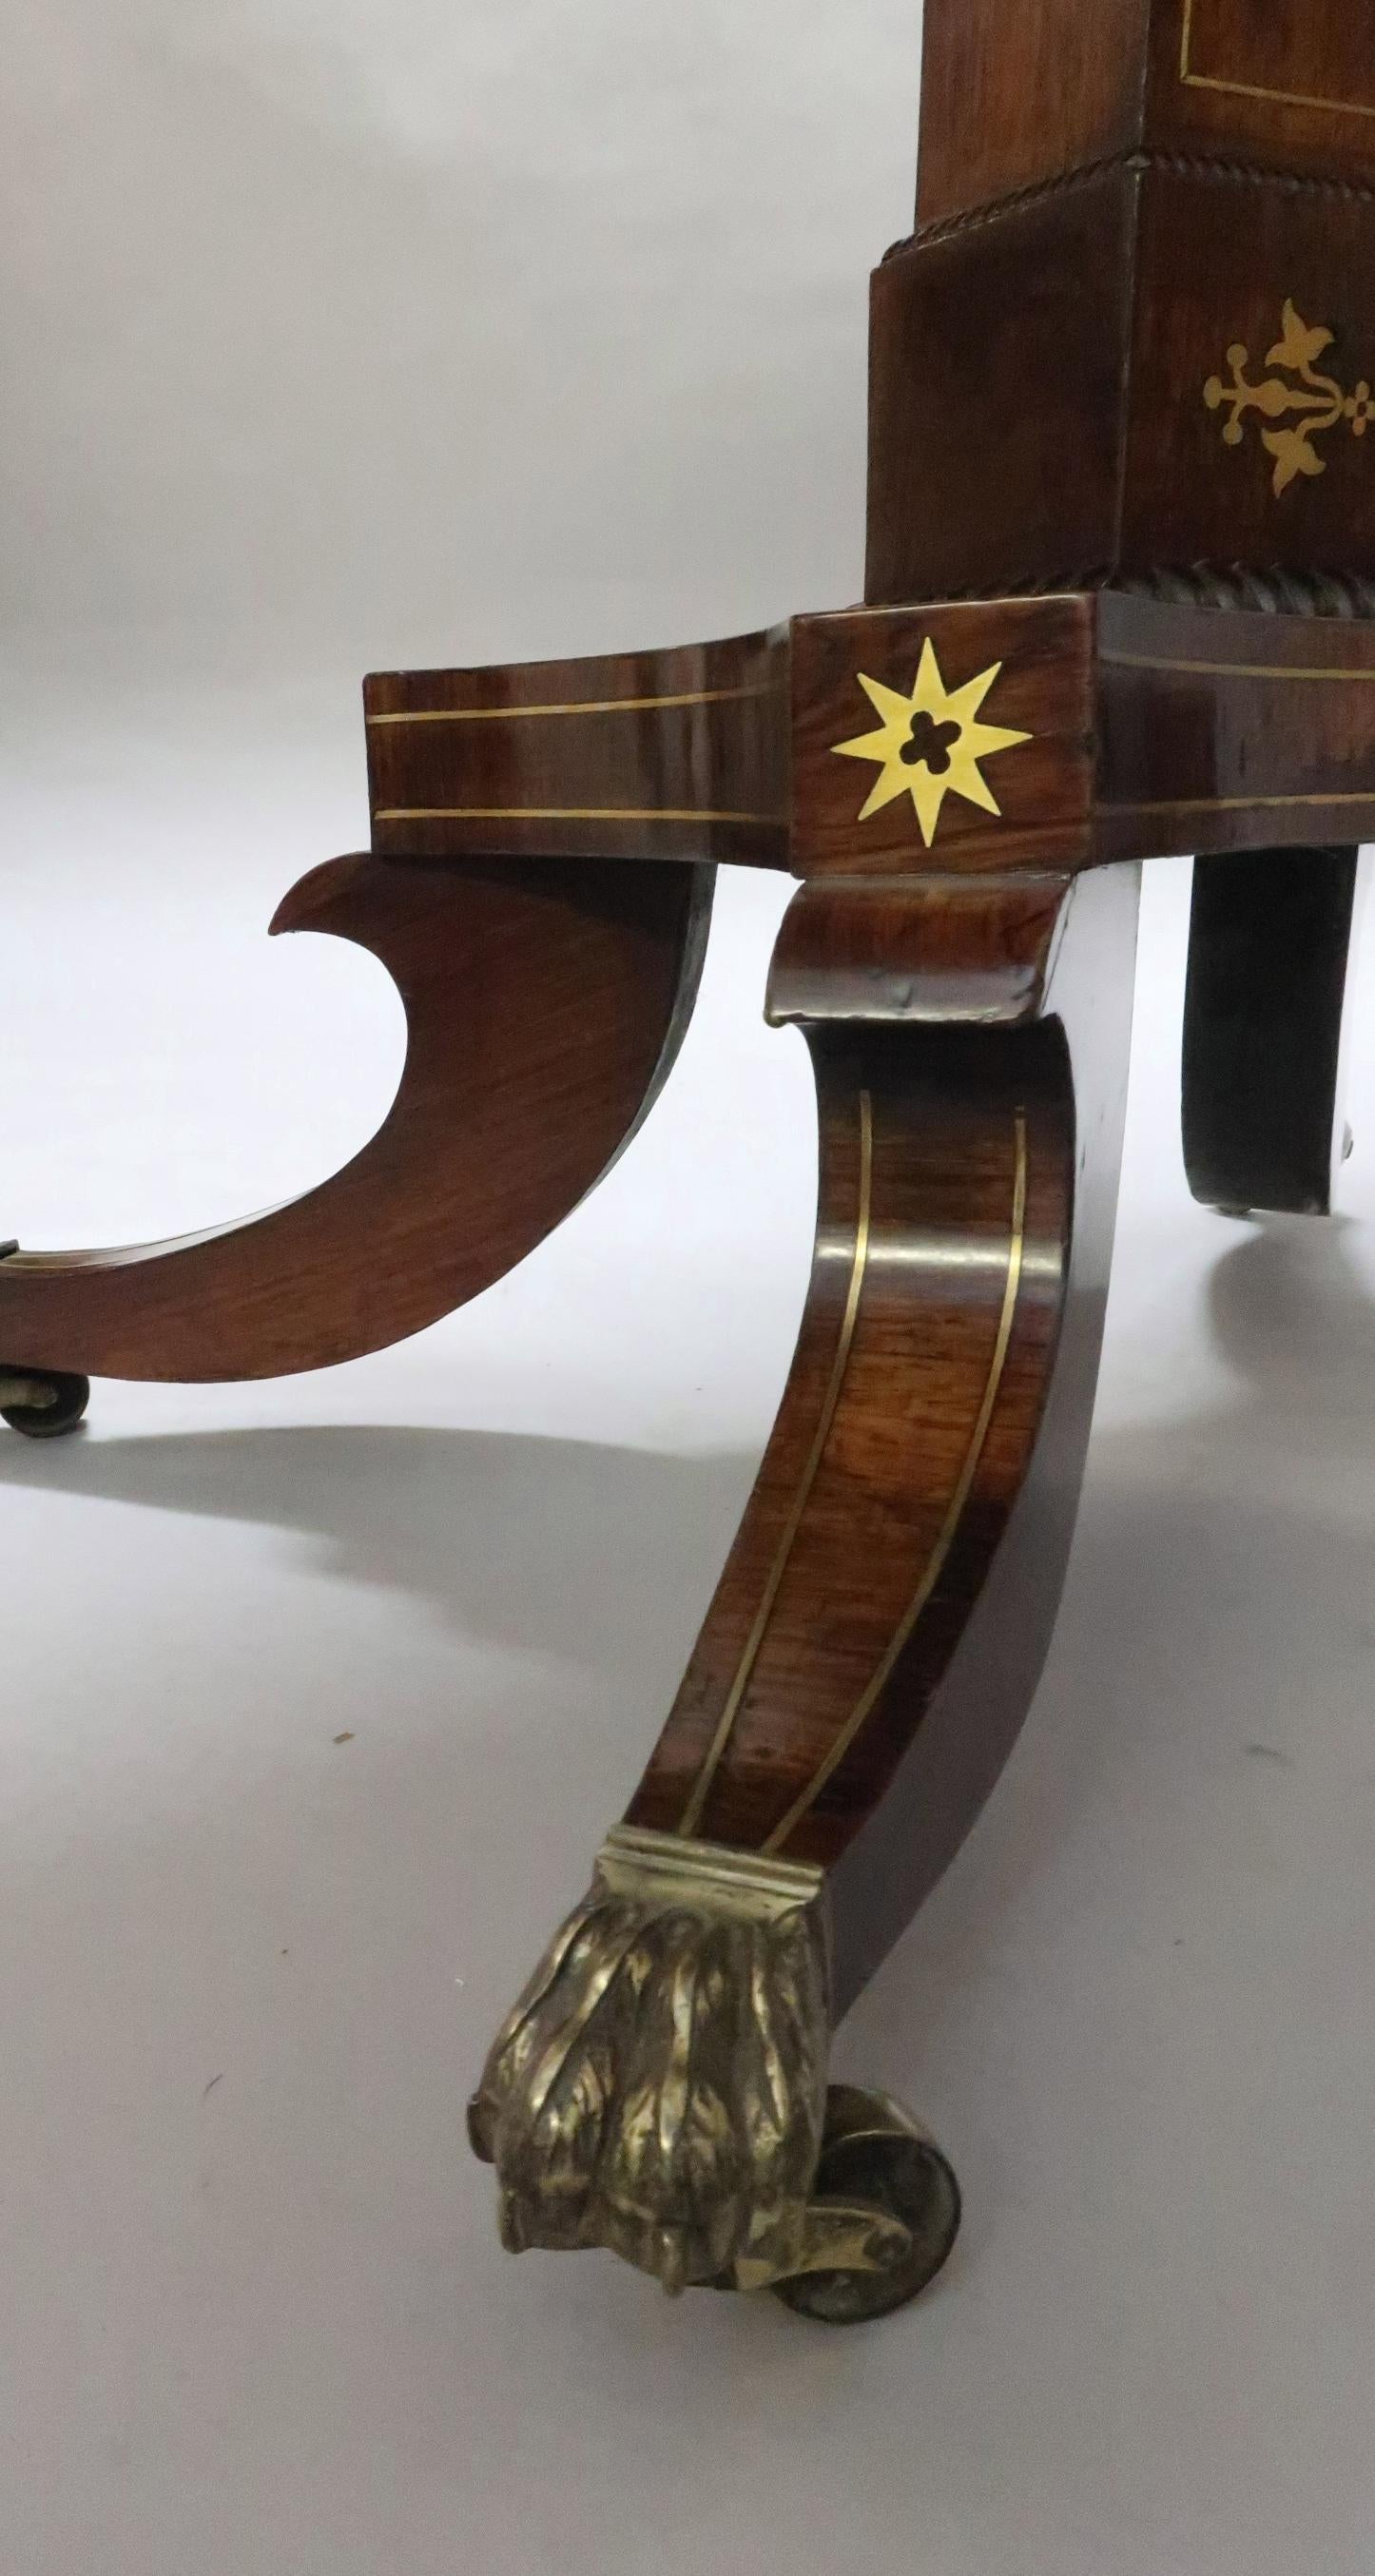 English Regency Rosewood and Brass Inlaid Side Table Attributed to John Mclean For Sale 4